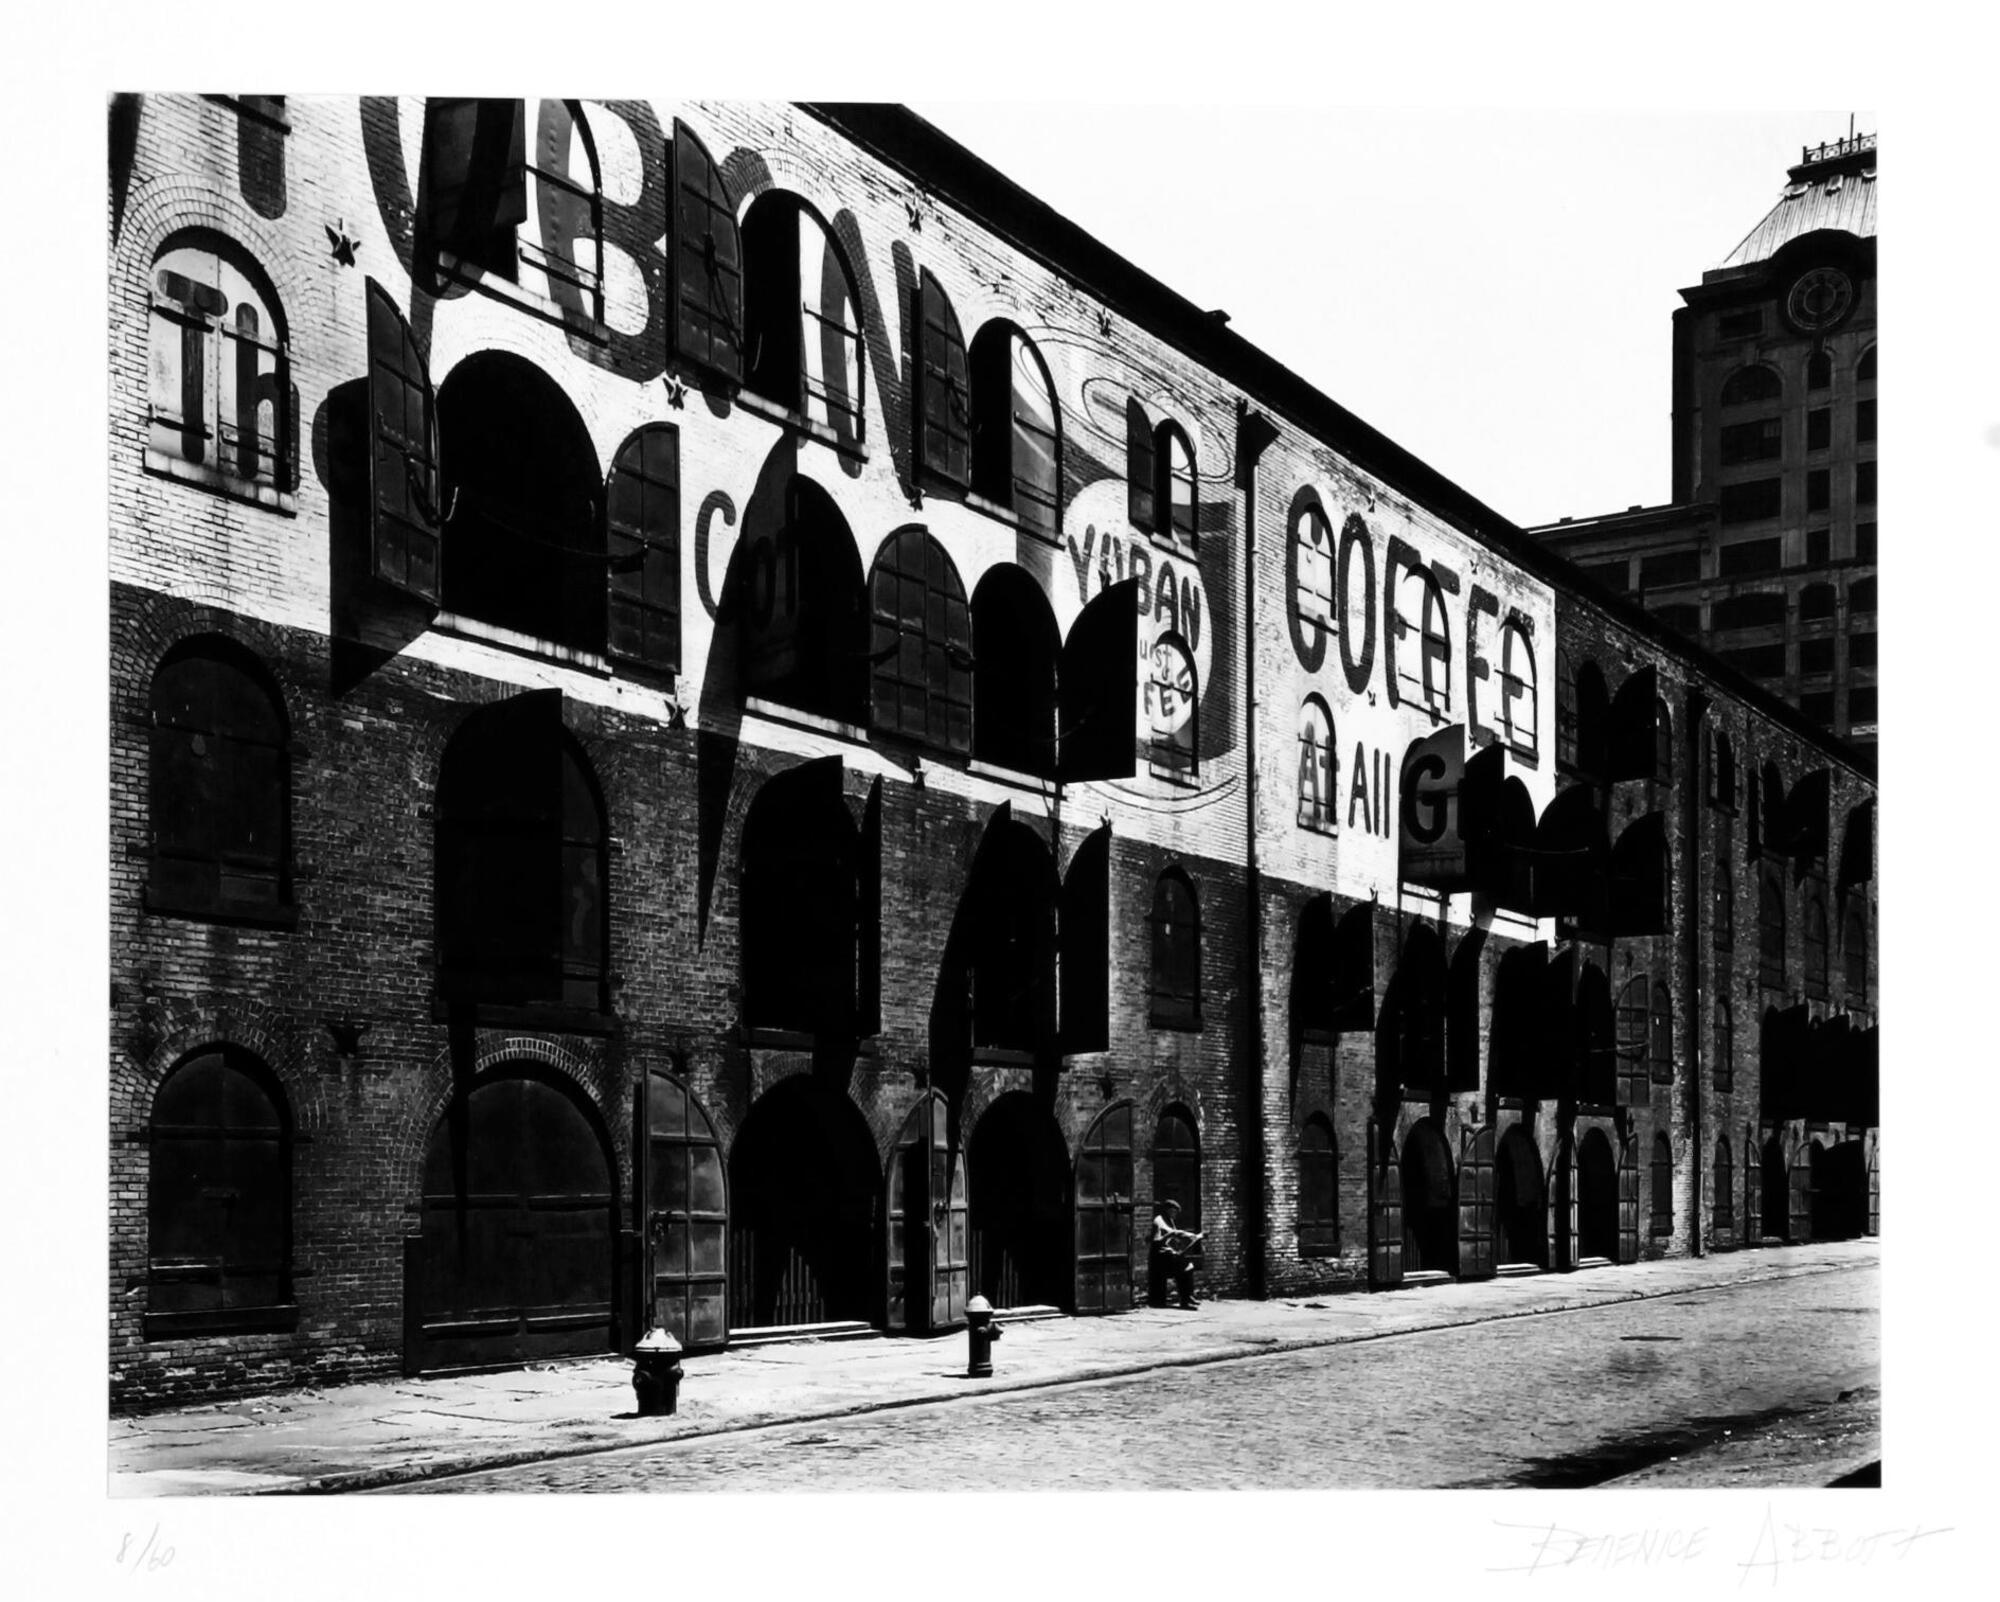 A black and white photograph of a warehouse in Brooklyn. A sign painted on the building advertises coffee, while a man sits outside reading a newspaper.